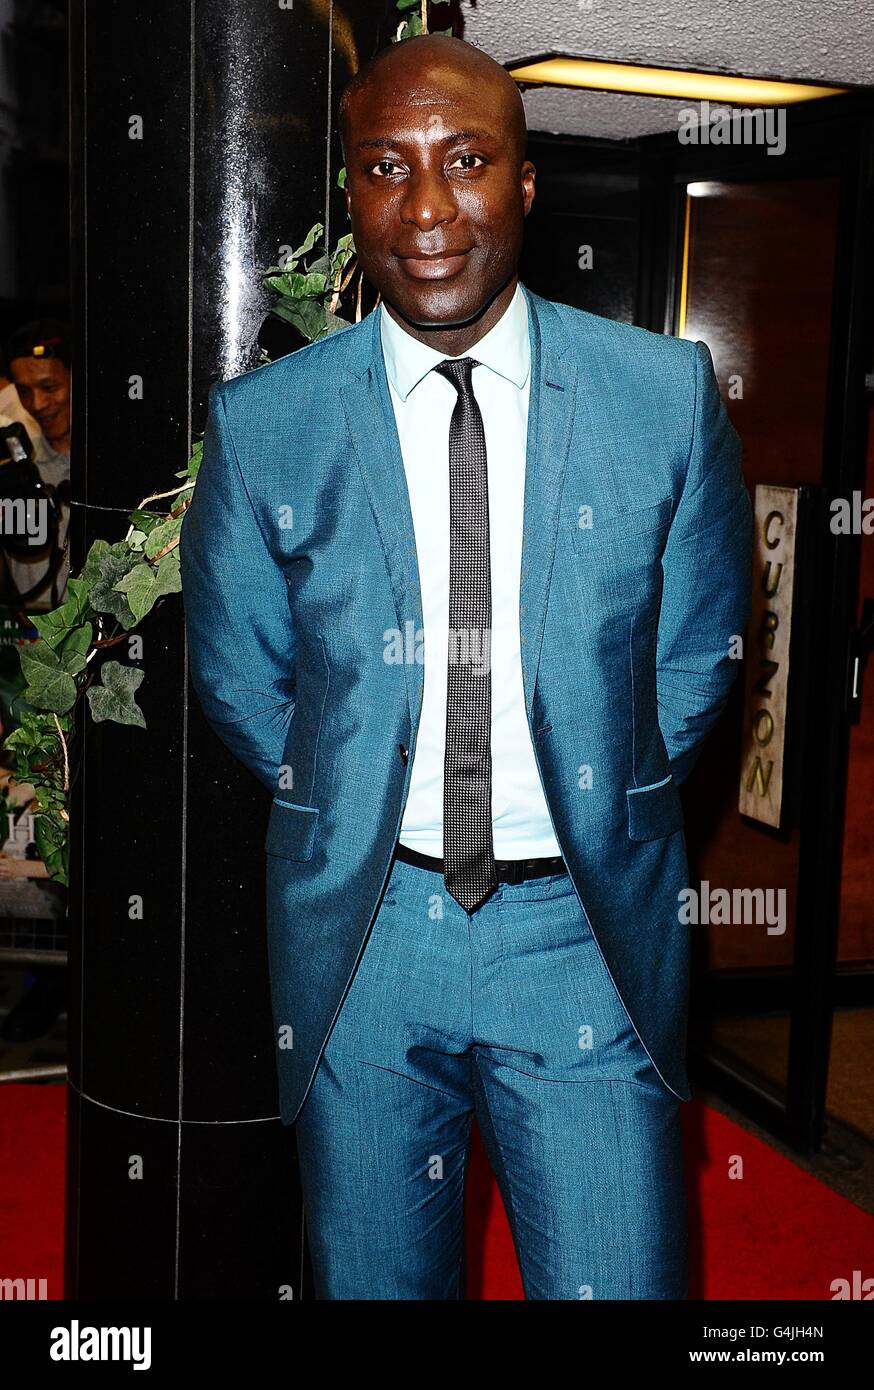 Ozwald Boateng arriving for the UK premiere of Melancholia, at the Curzon Mayfair cinema, London. Stock Photo